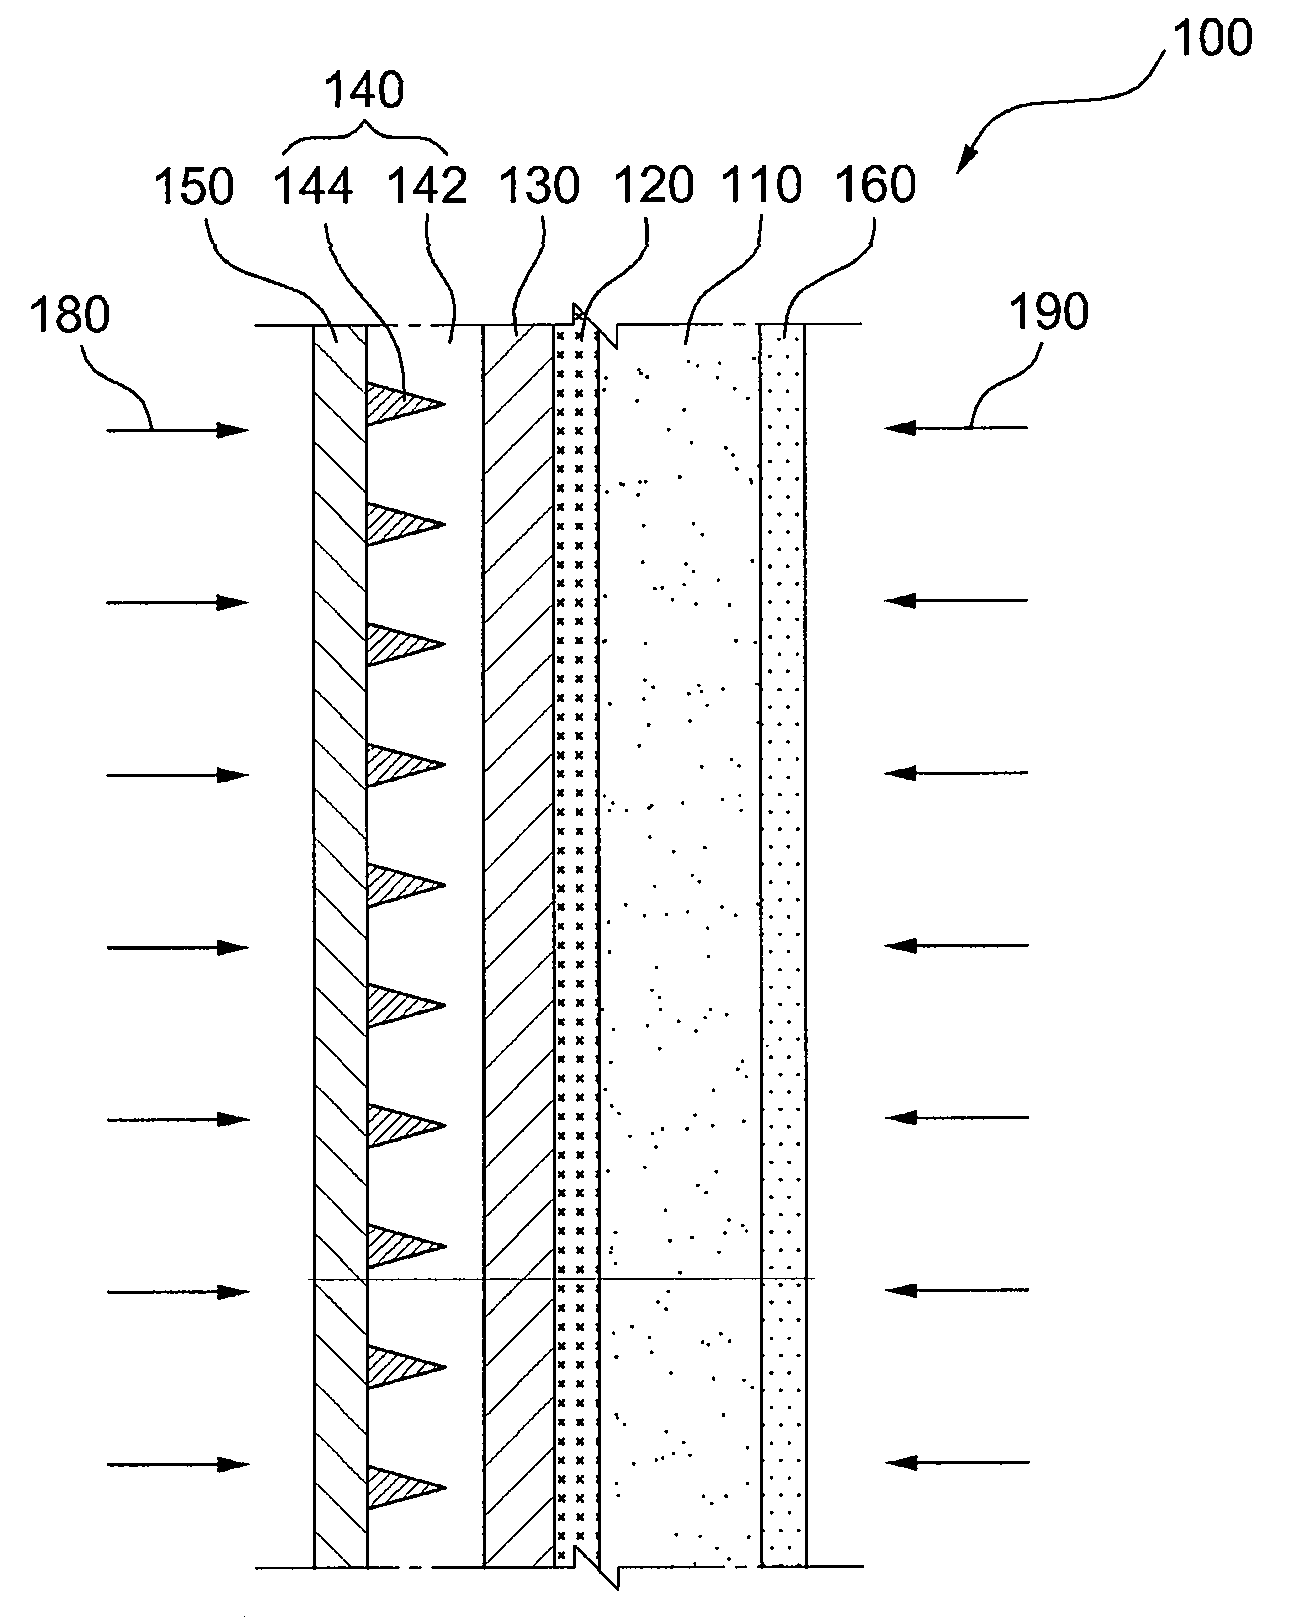 Filter for display device